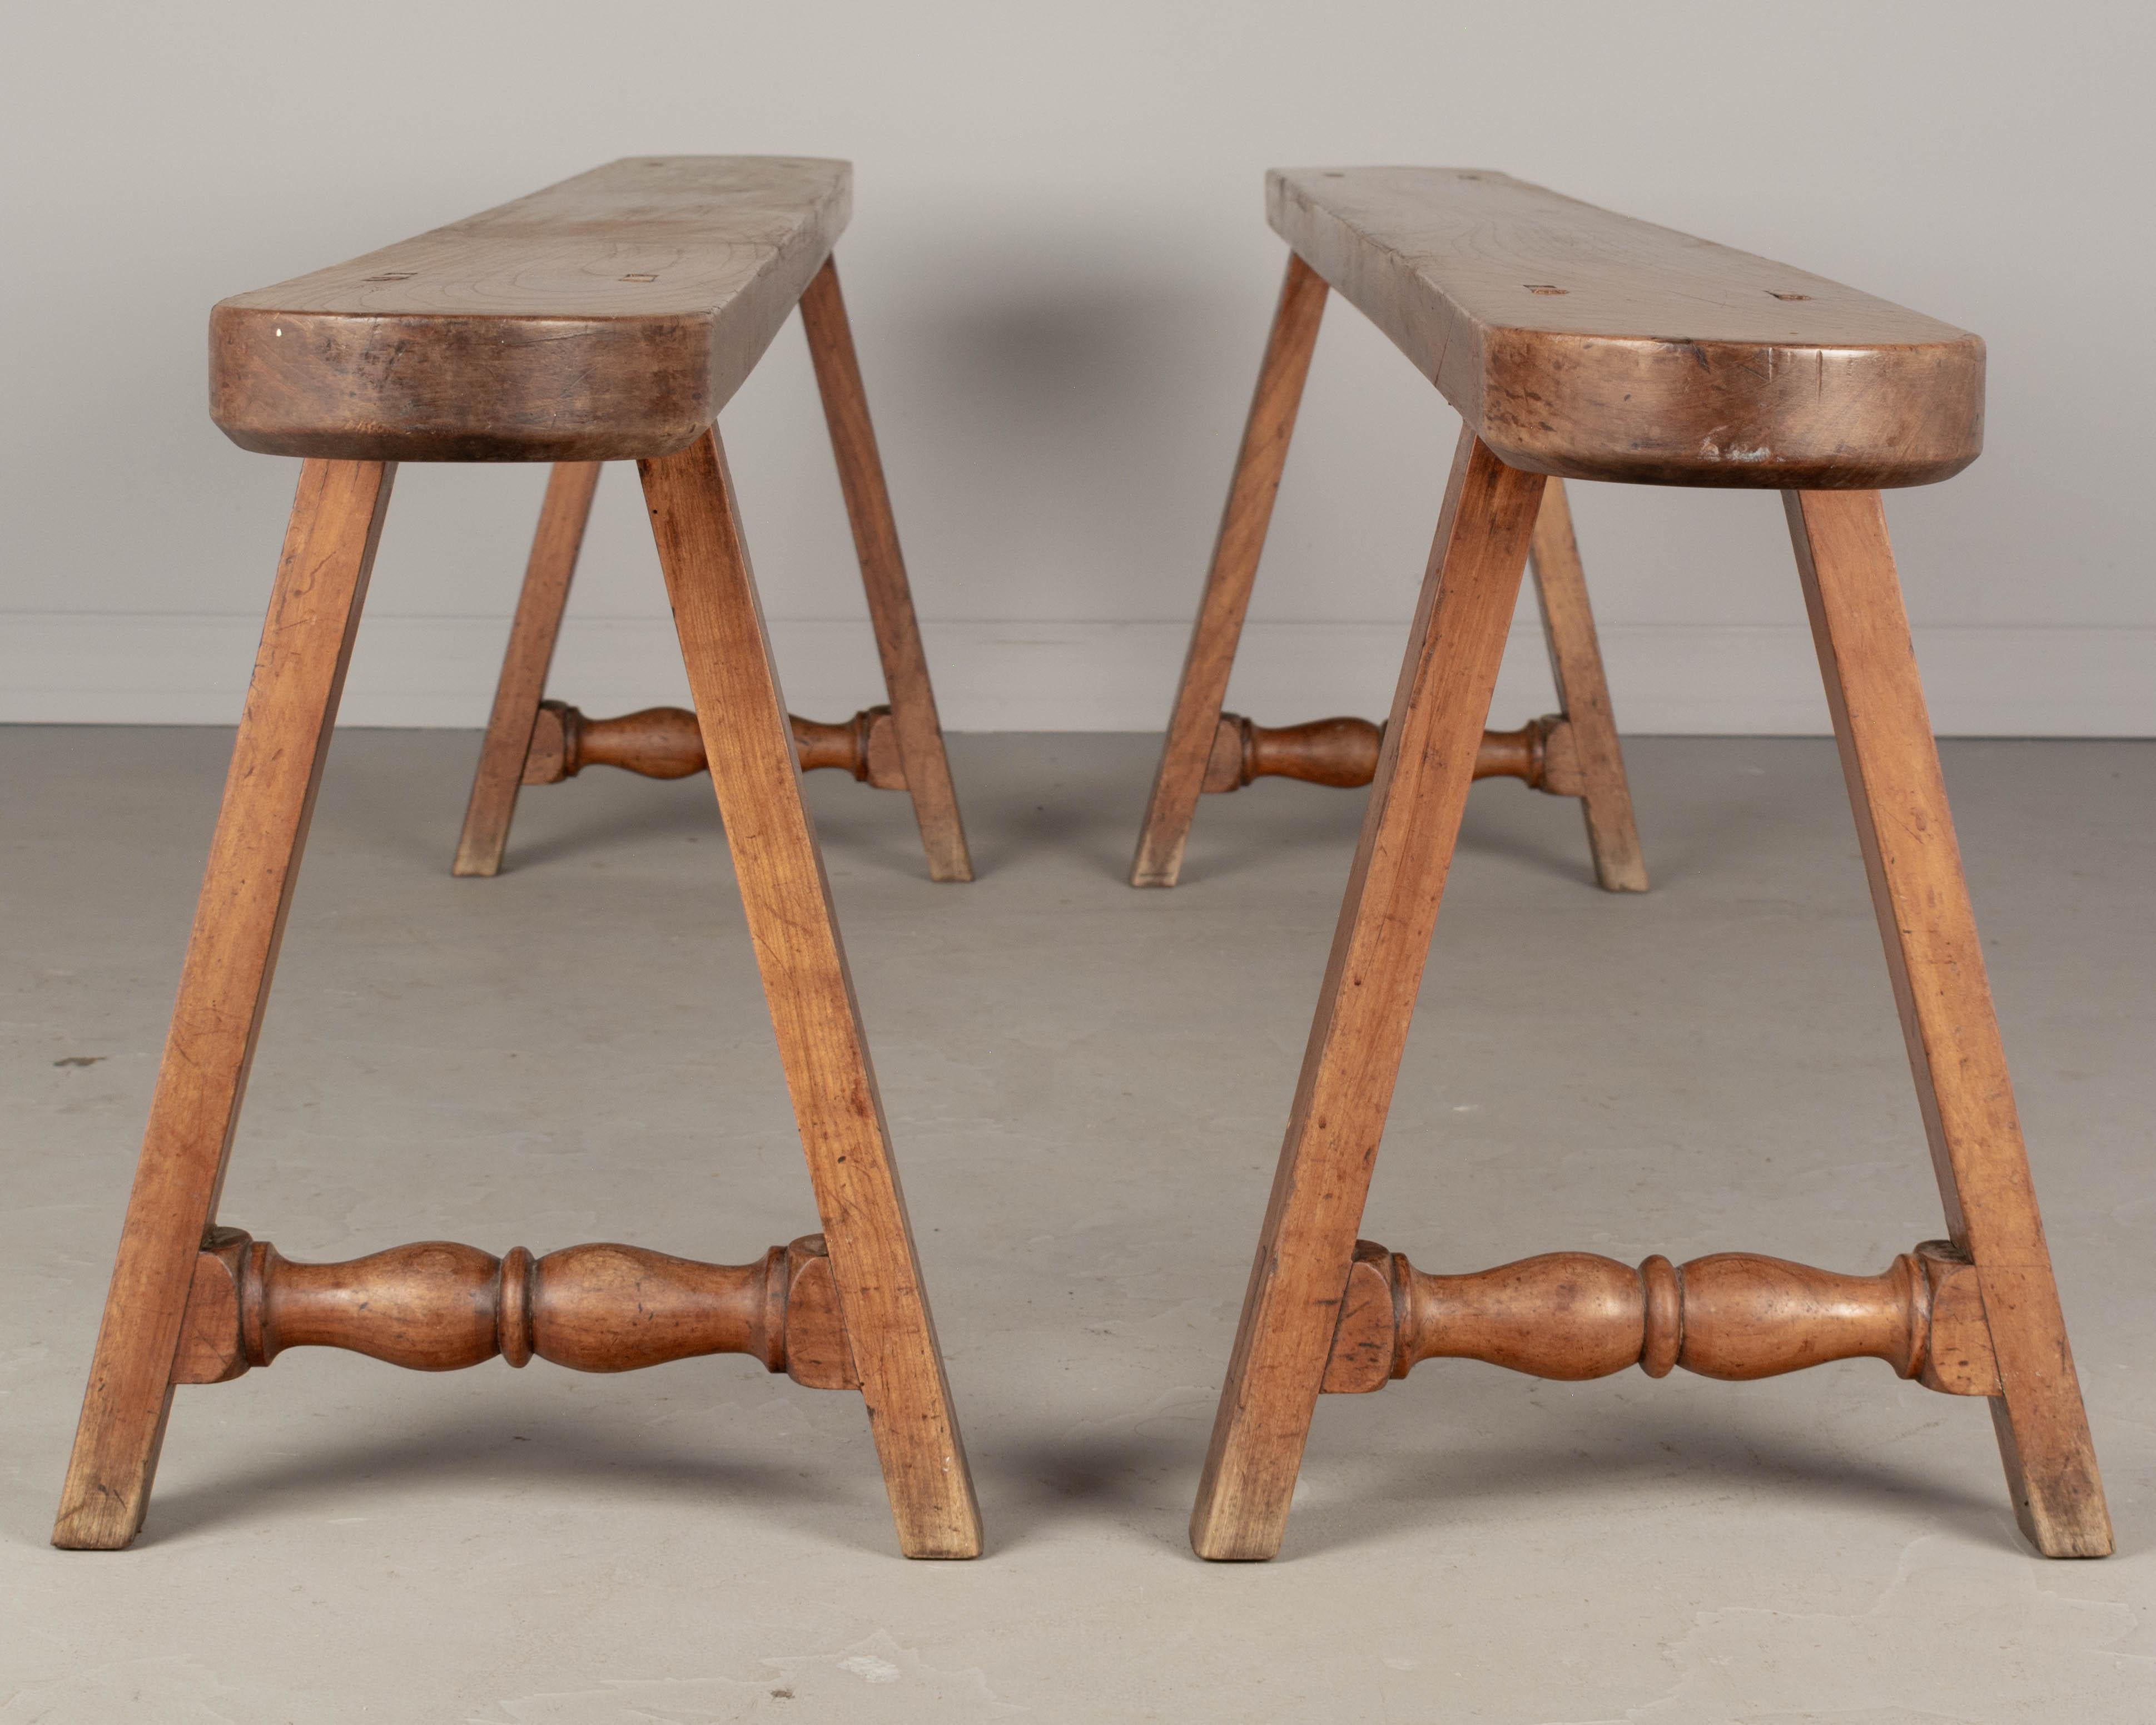 Country French Cherry Wood Farm Table Benches, a Pair In Good Condition For Sale In Winter Park, FL